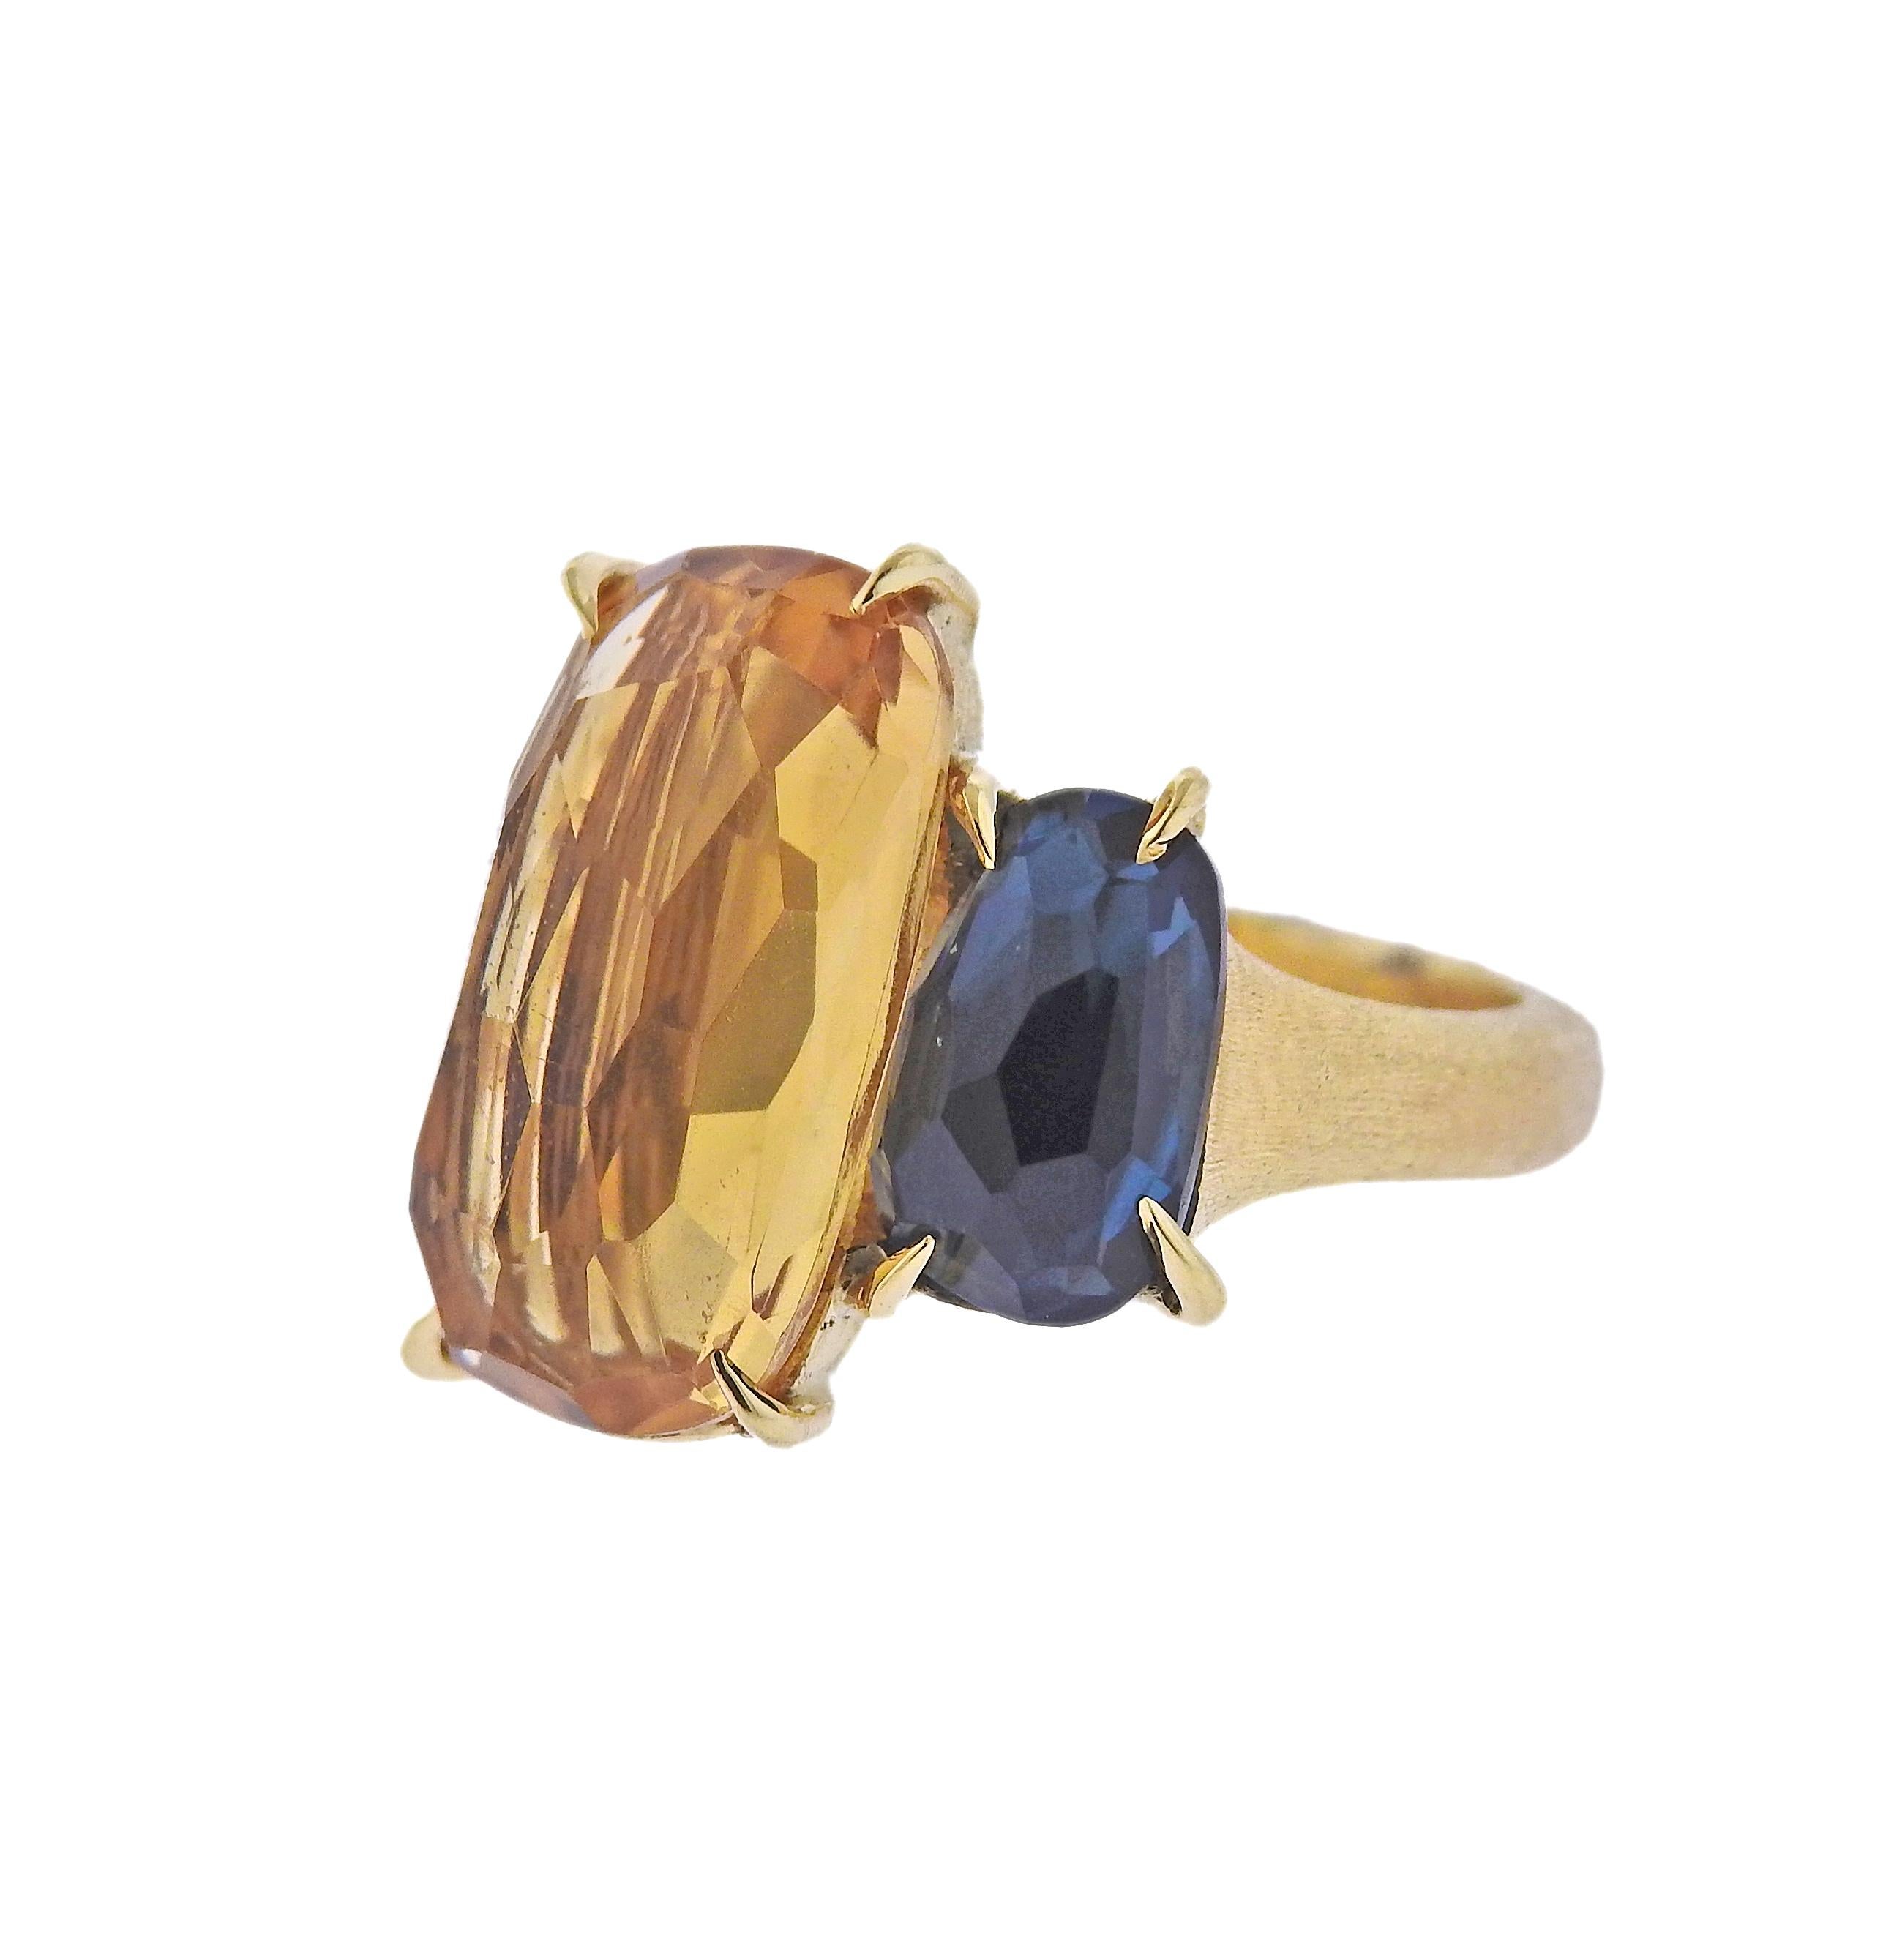 Marco Bicego Murano collection 18K gold ring set with citrine and blue topaz gemstones. Ring measures 26mm x 24mm and available in size 7. Marked: Marco Bicego, Made in Italy, 750. Weight is 8.3 grams.